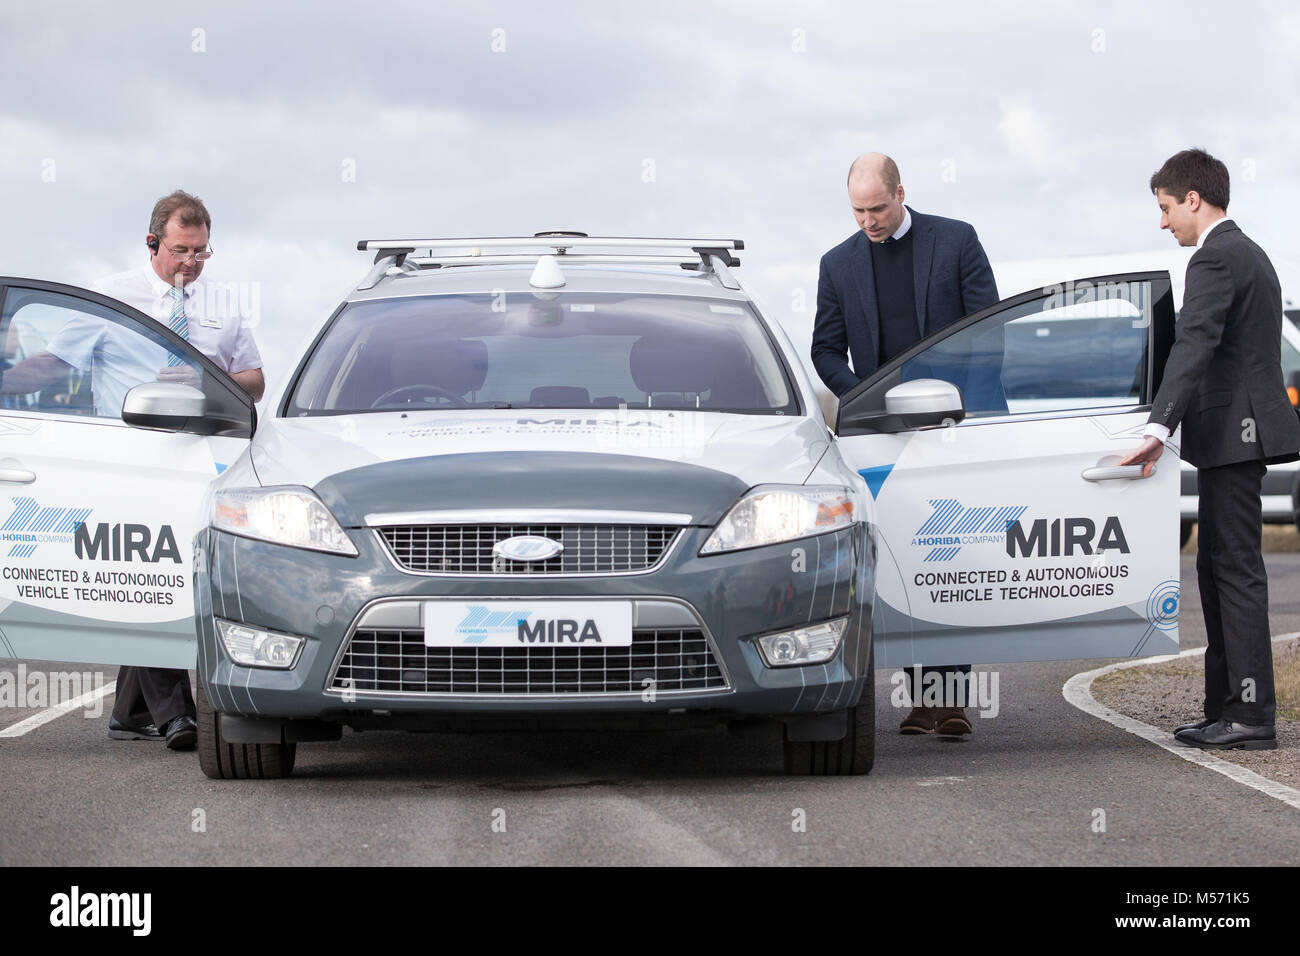 The Duke of Cambridge enters the passenger seat of the MIRA ADAS autonomous vehicle during a visit to the MIRA Technology Park in Nuneaton, Warwickshire, which supplies pioneering engineering, research and test services to the transport industry. MIRA was formerly known as the Motor Industry Research Association. Stock Photo